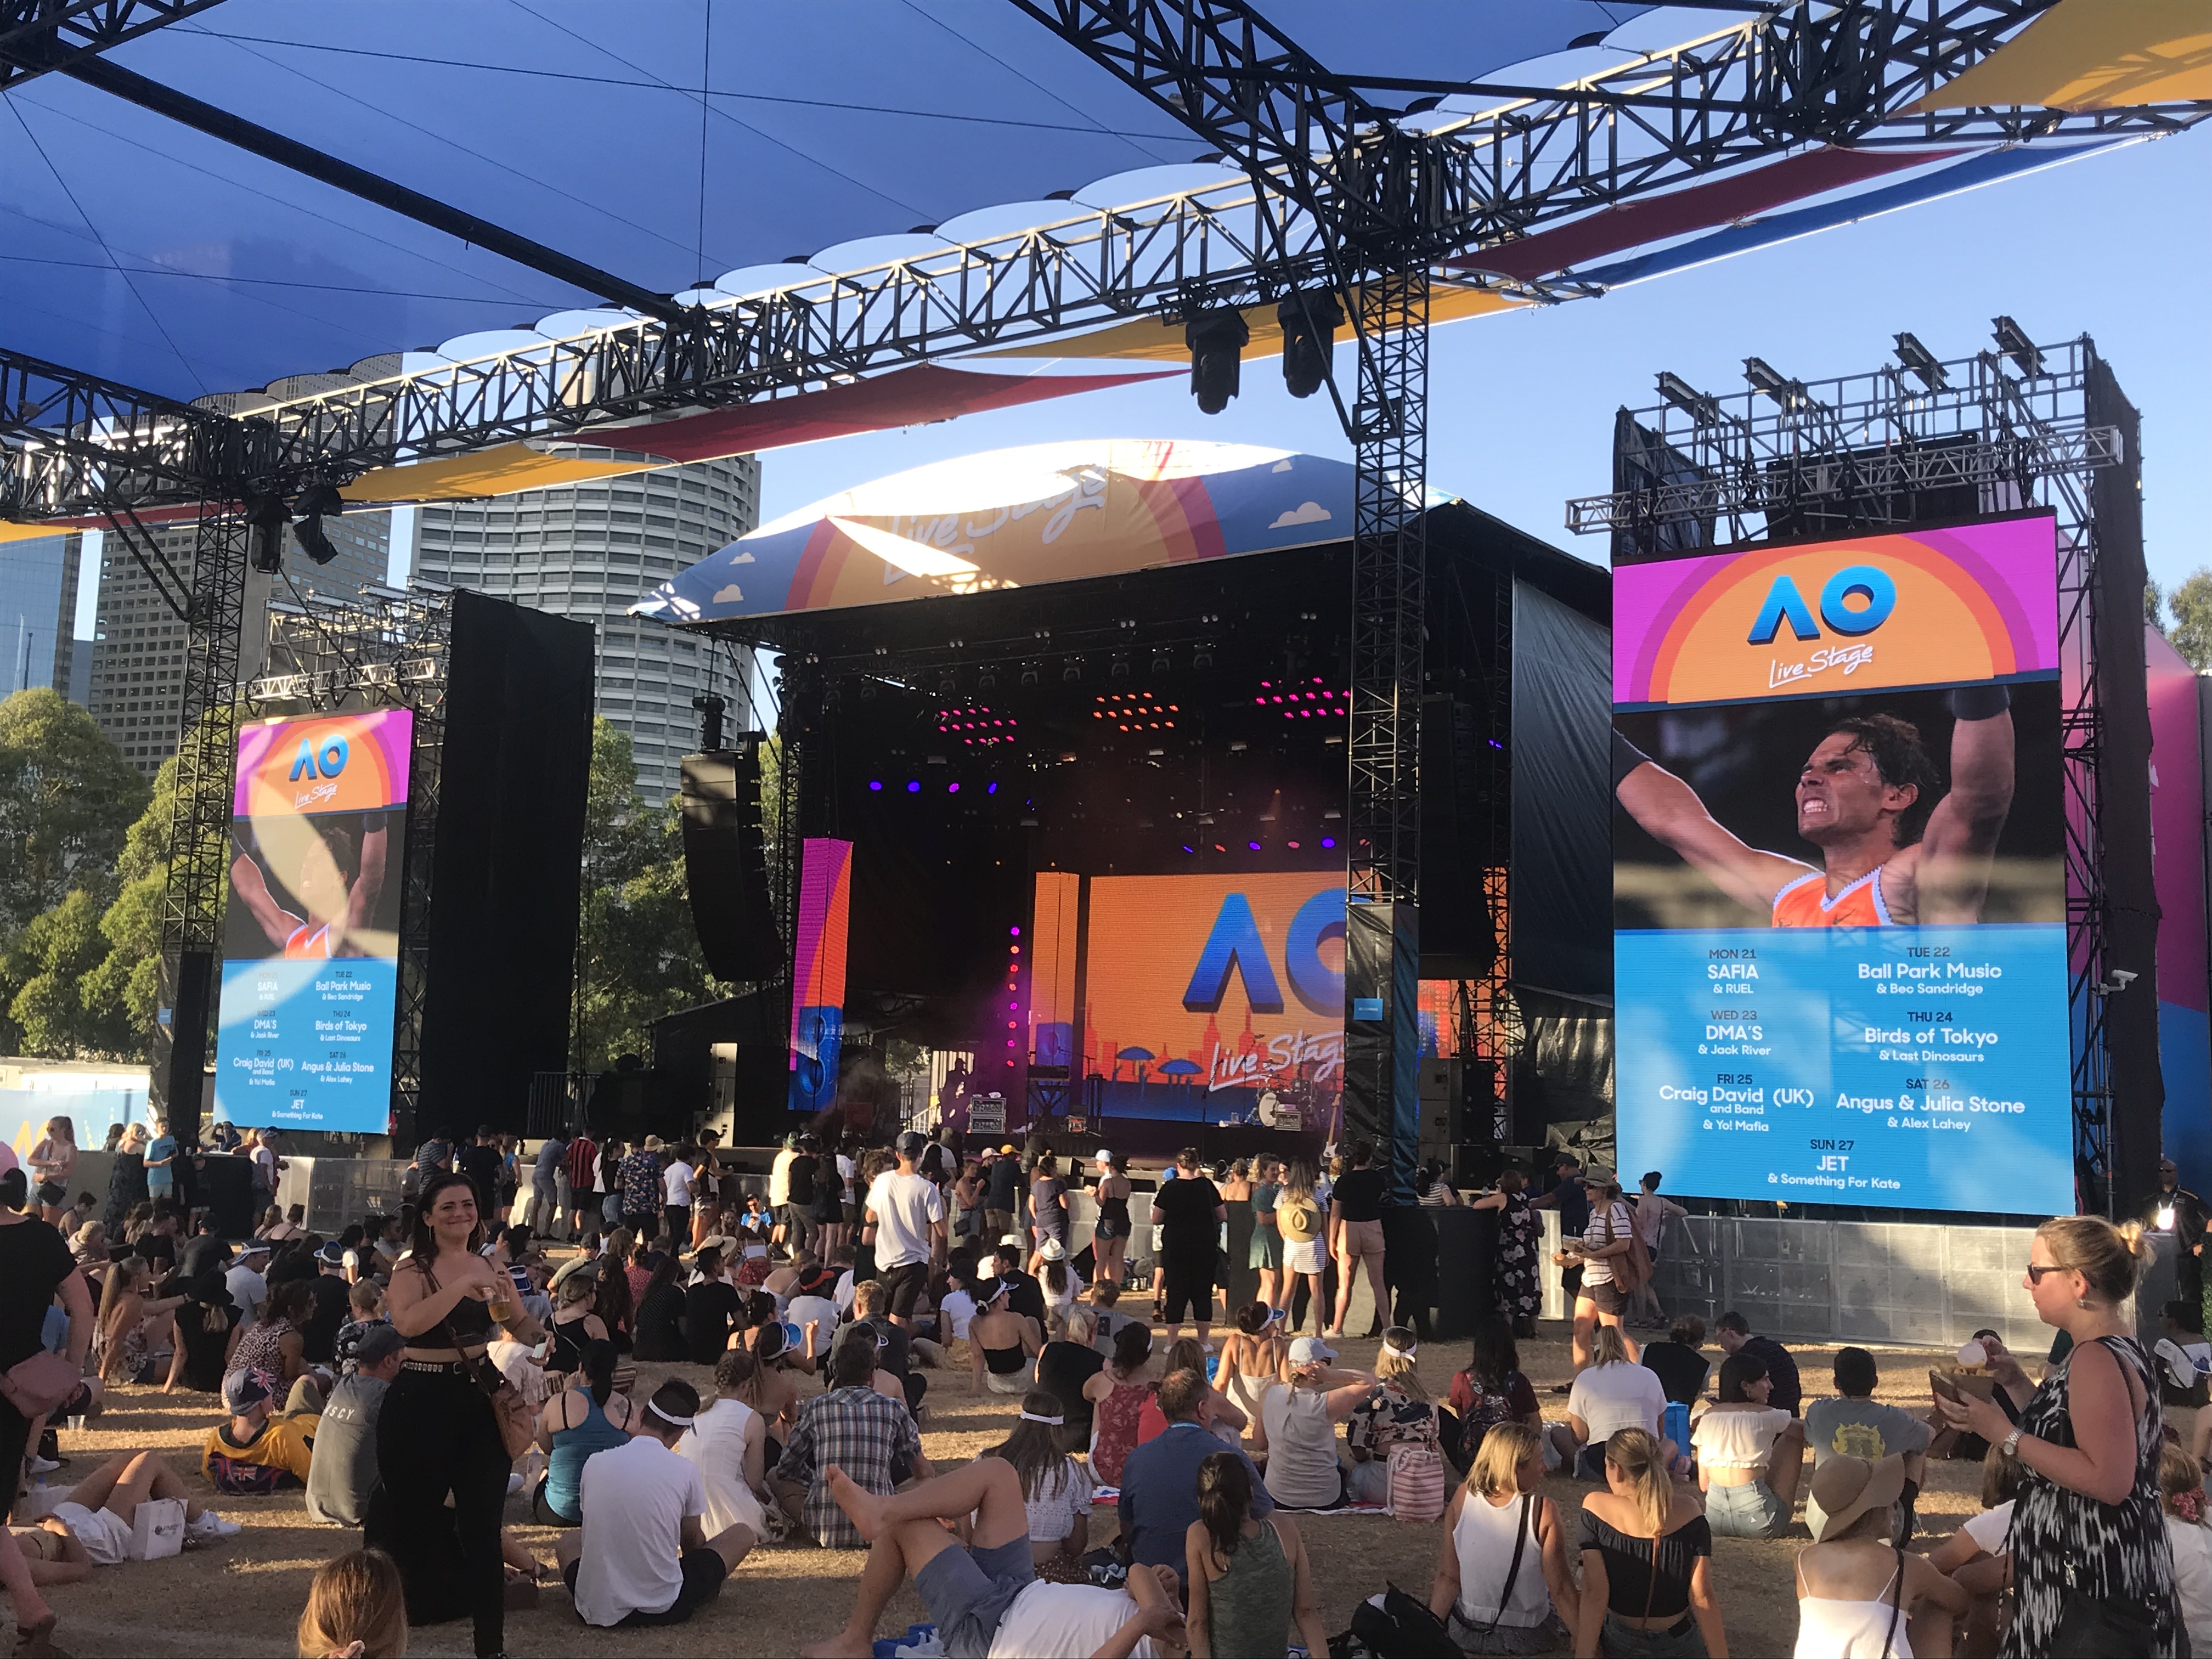 What does Aus Open have to do with music? On Melbourne, tennis and live music stage